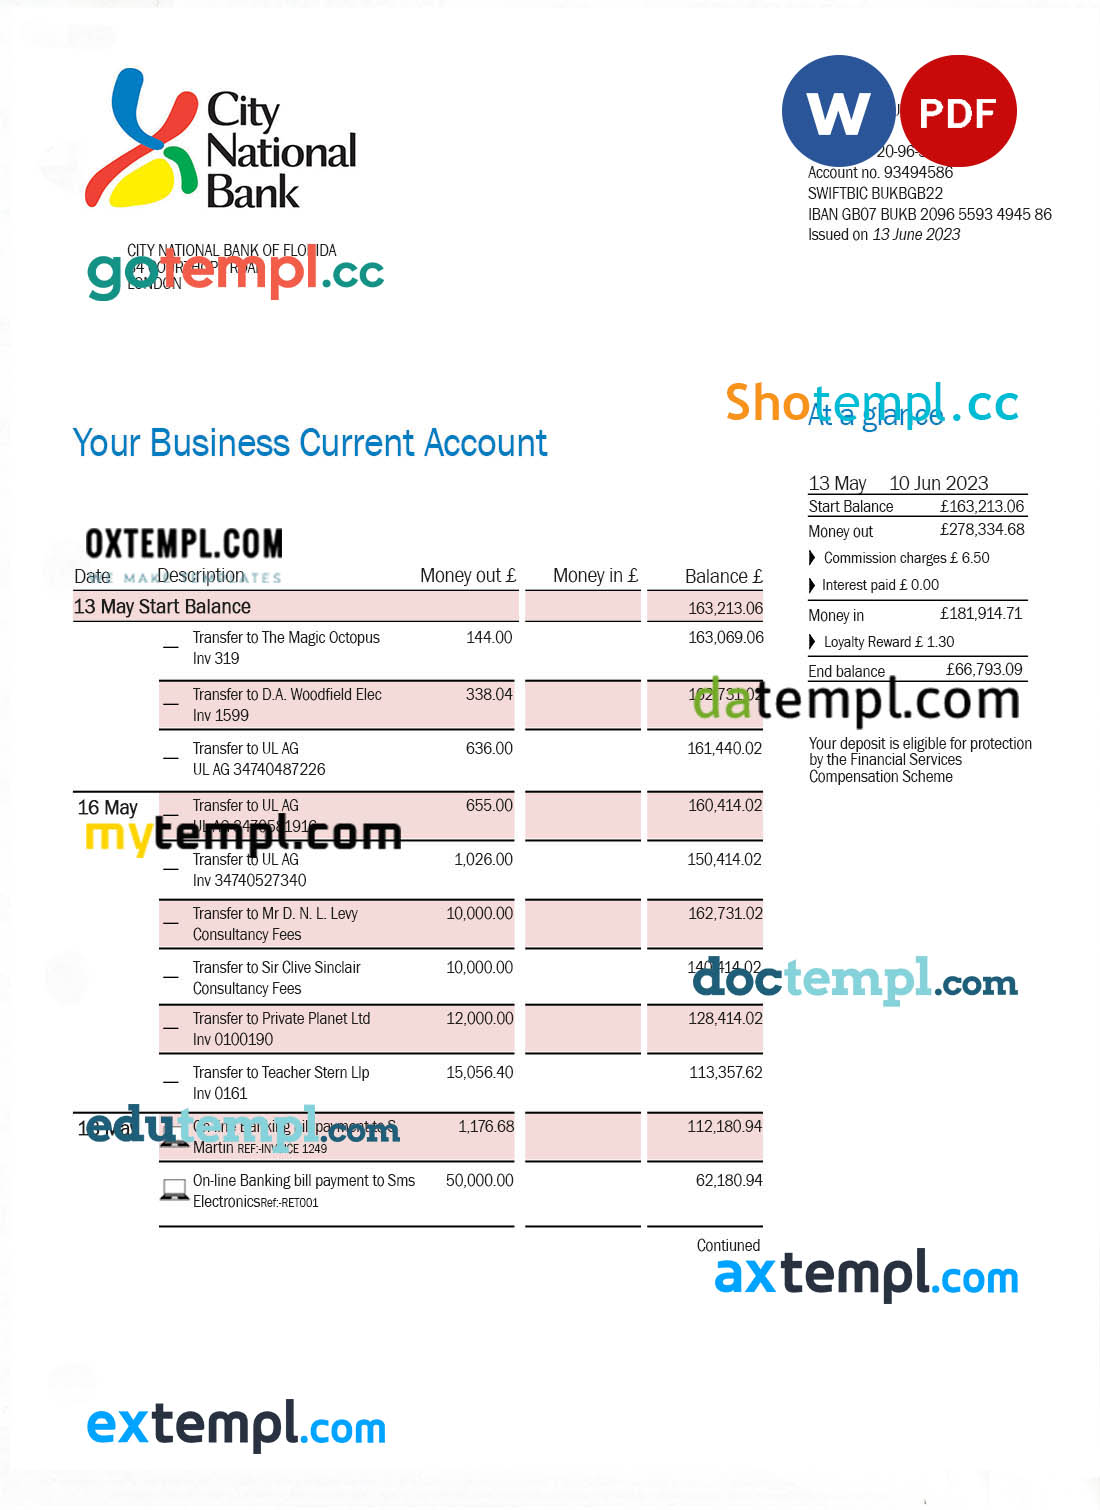 City National Bank of Florida firm account statement Word and PDF template